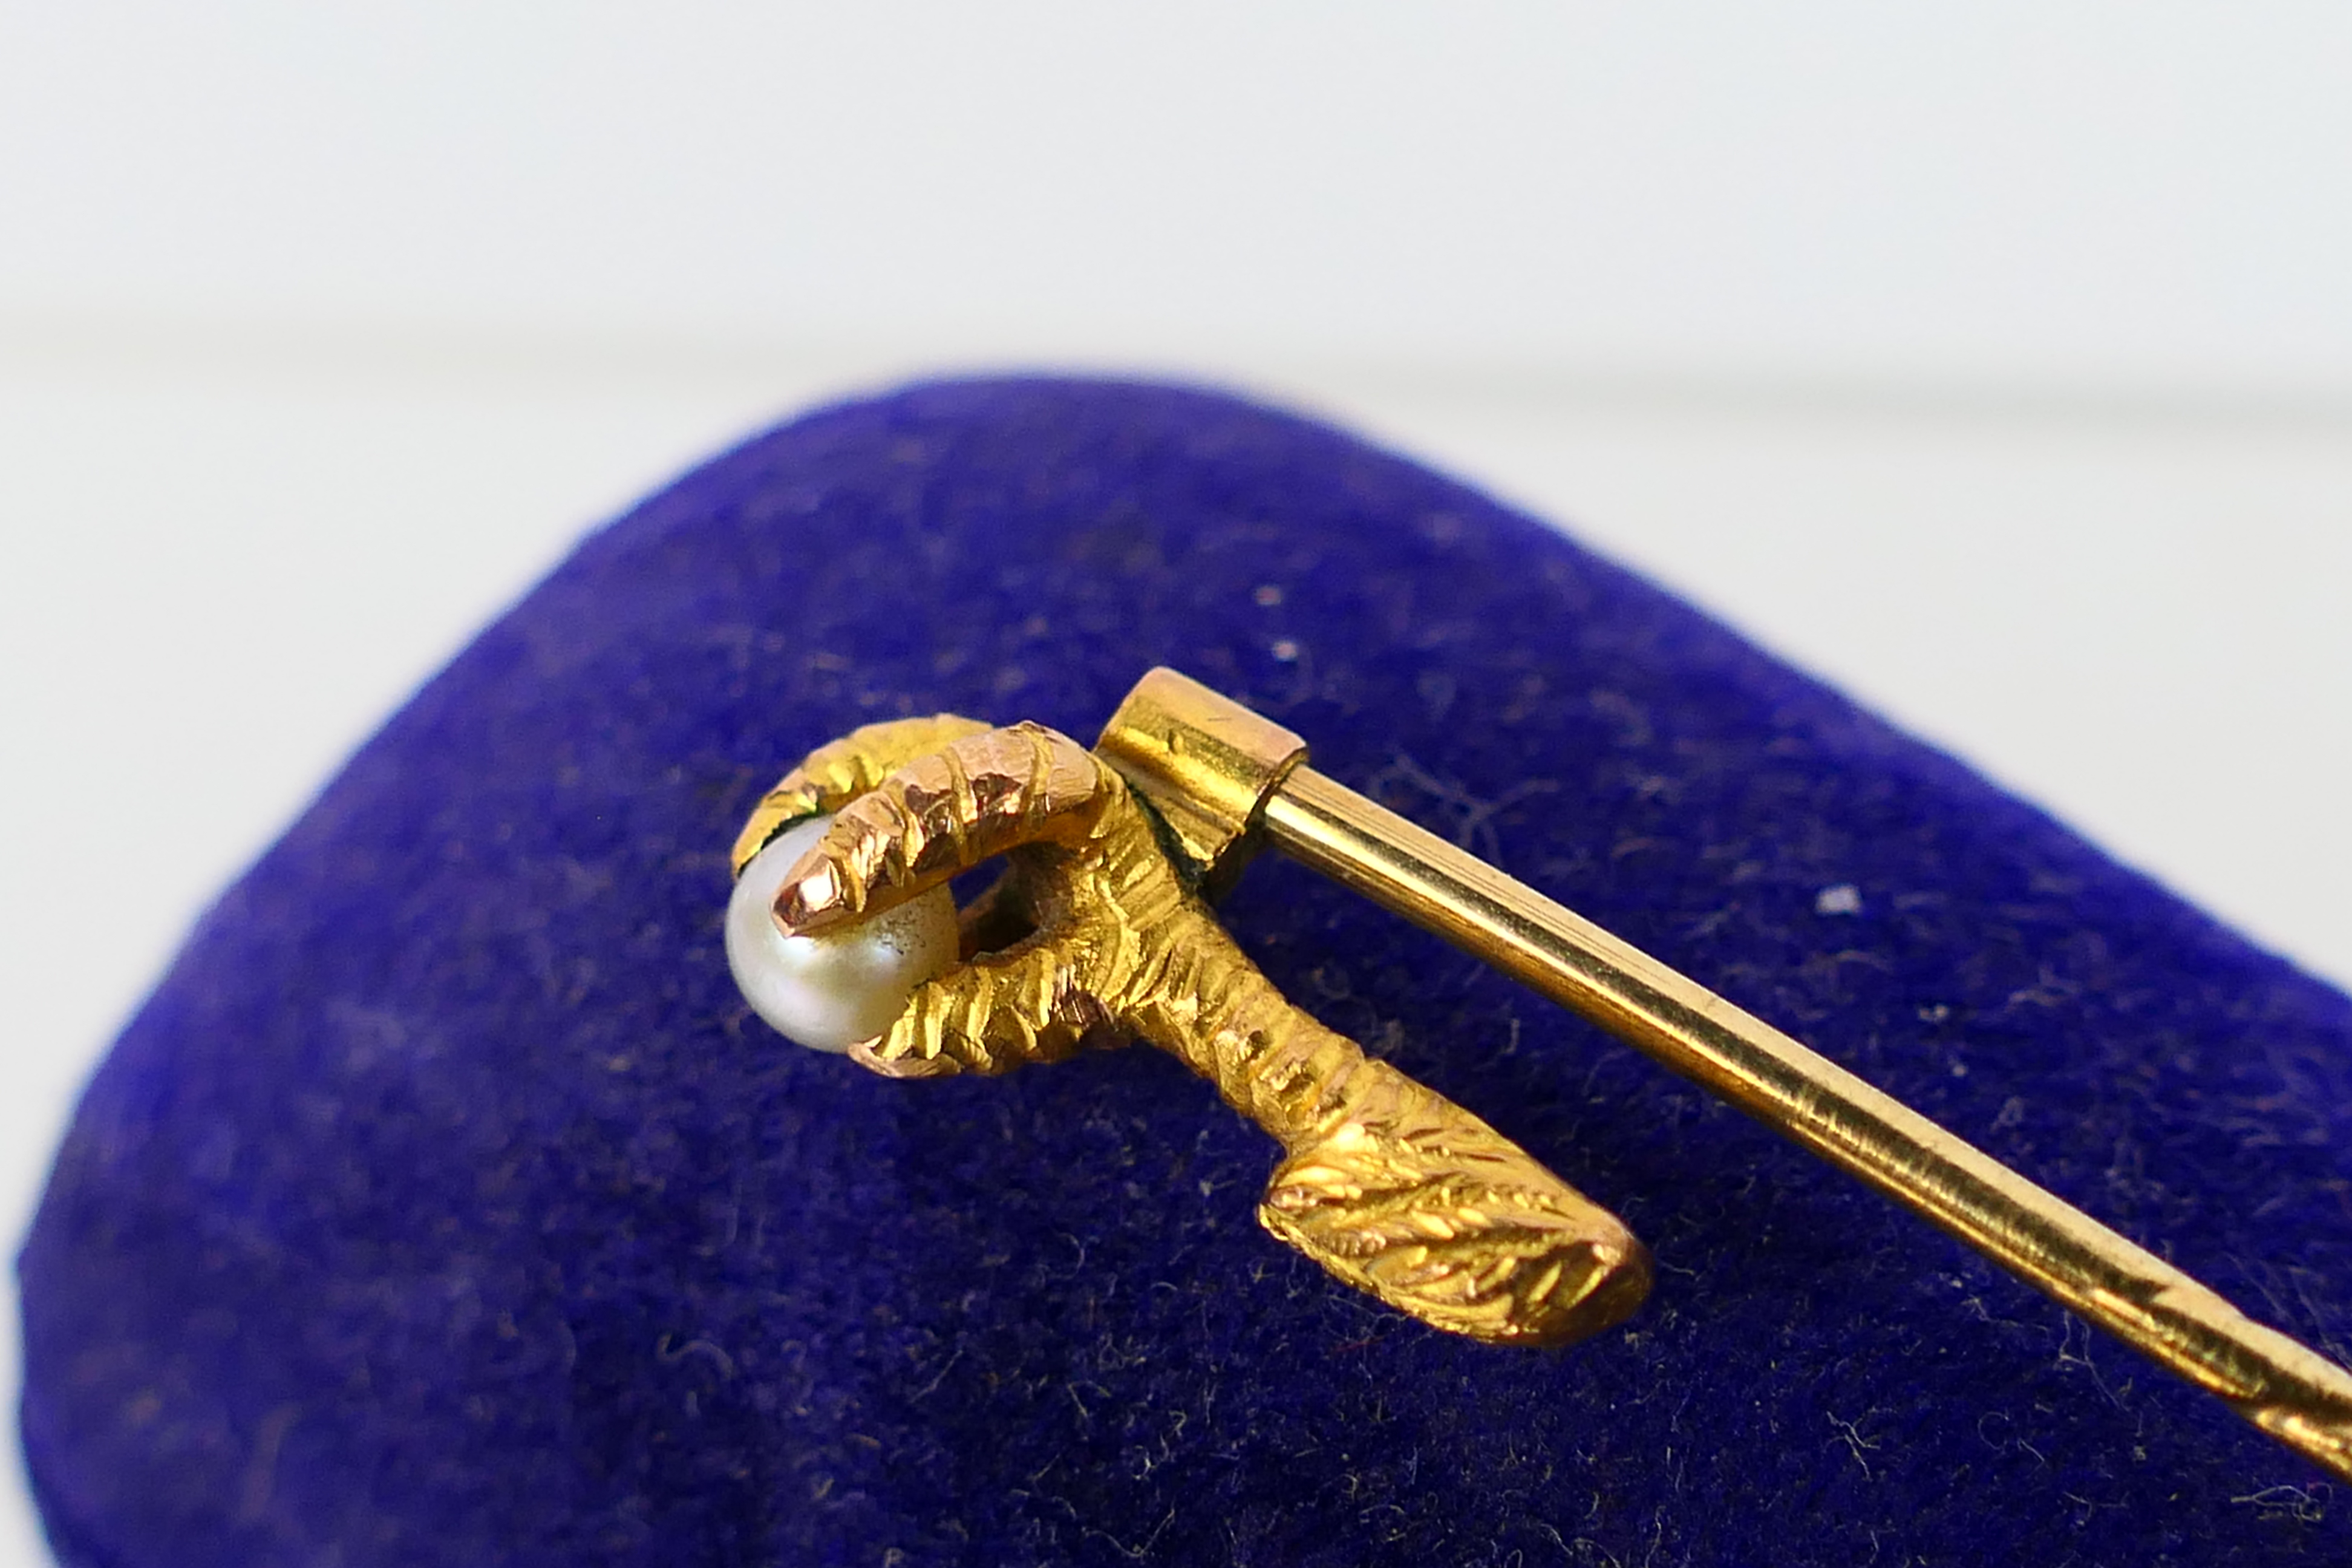 A Victorian yellow metal and pearl stick pin, formed as a bird's talon clutching the pearl, - Image 3 of 9